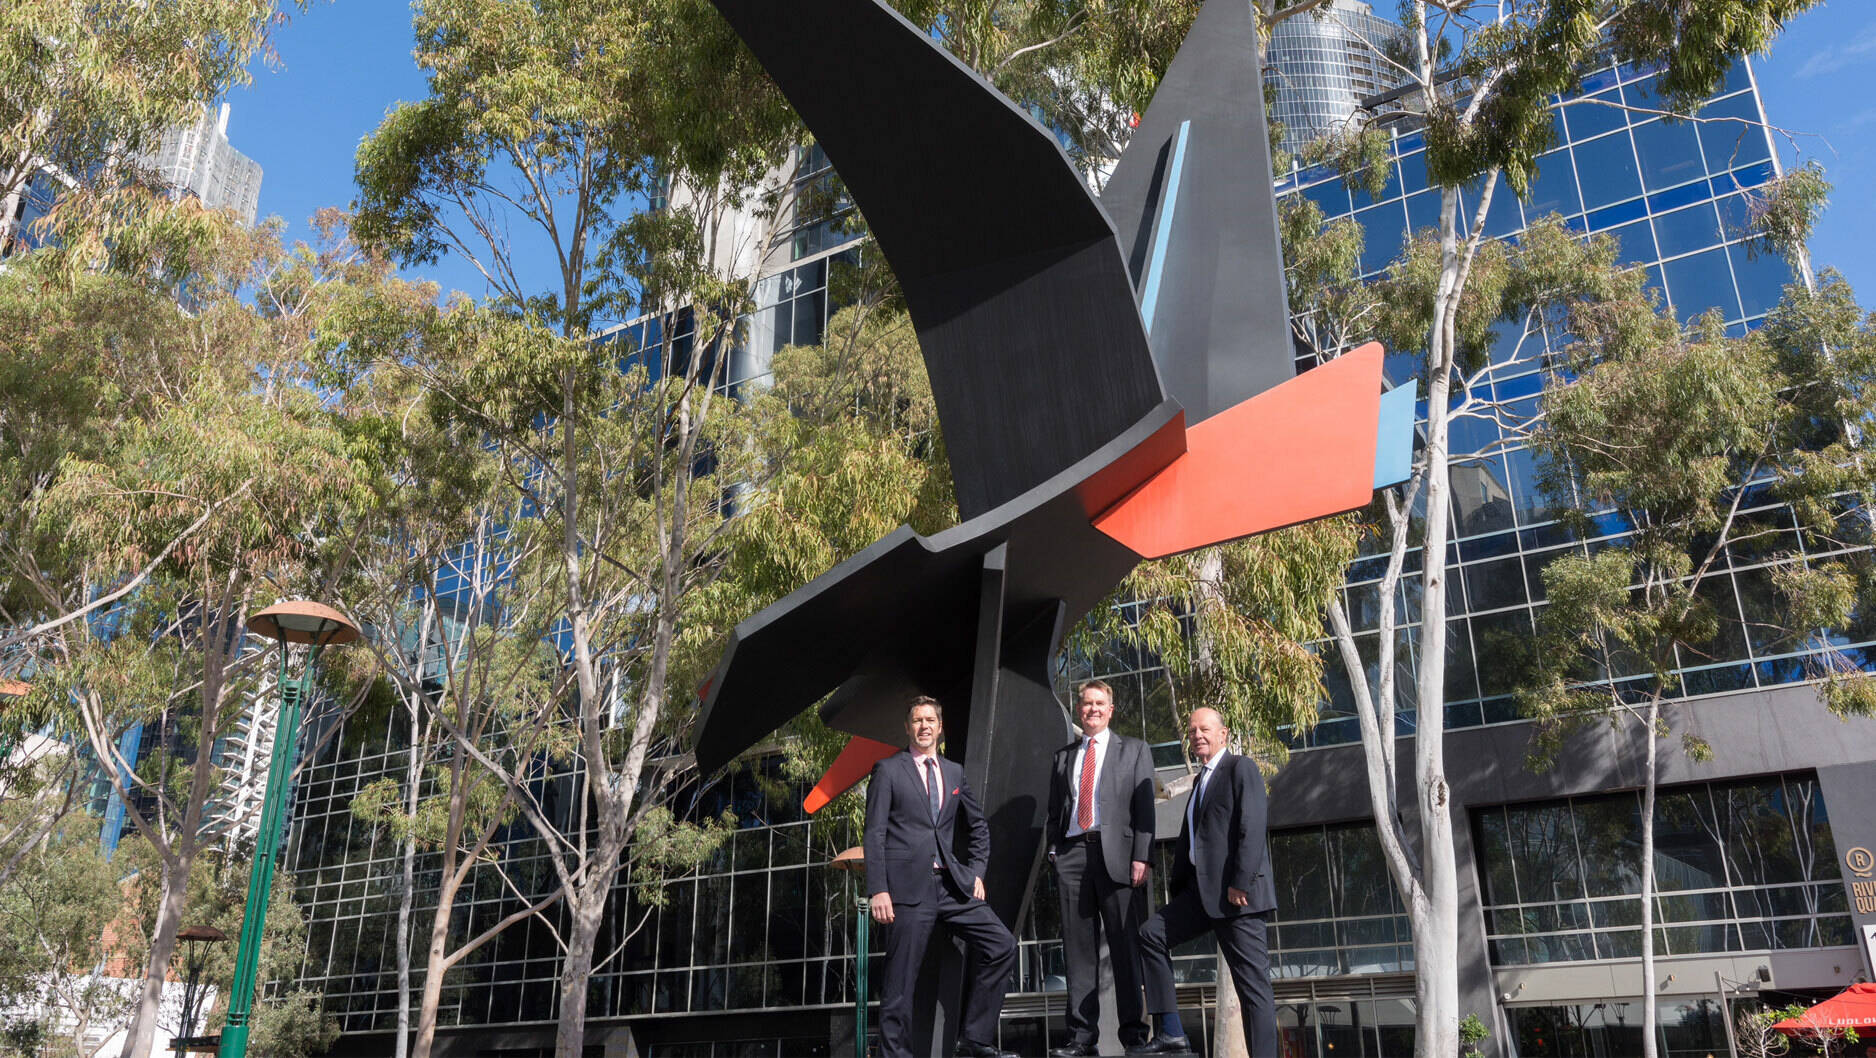 Image Photo — Melbourne City Councillor Nick Reece, ExxonMobil Australia Chairman Richard Owen and Central Equity's Eddie Kutner with the Shearwater scuplture.